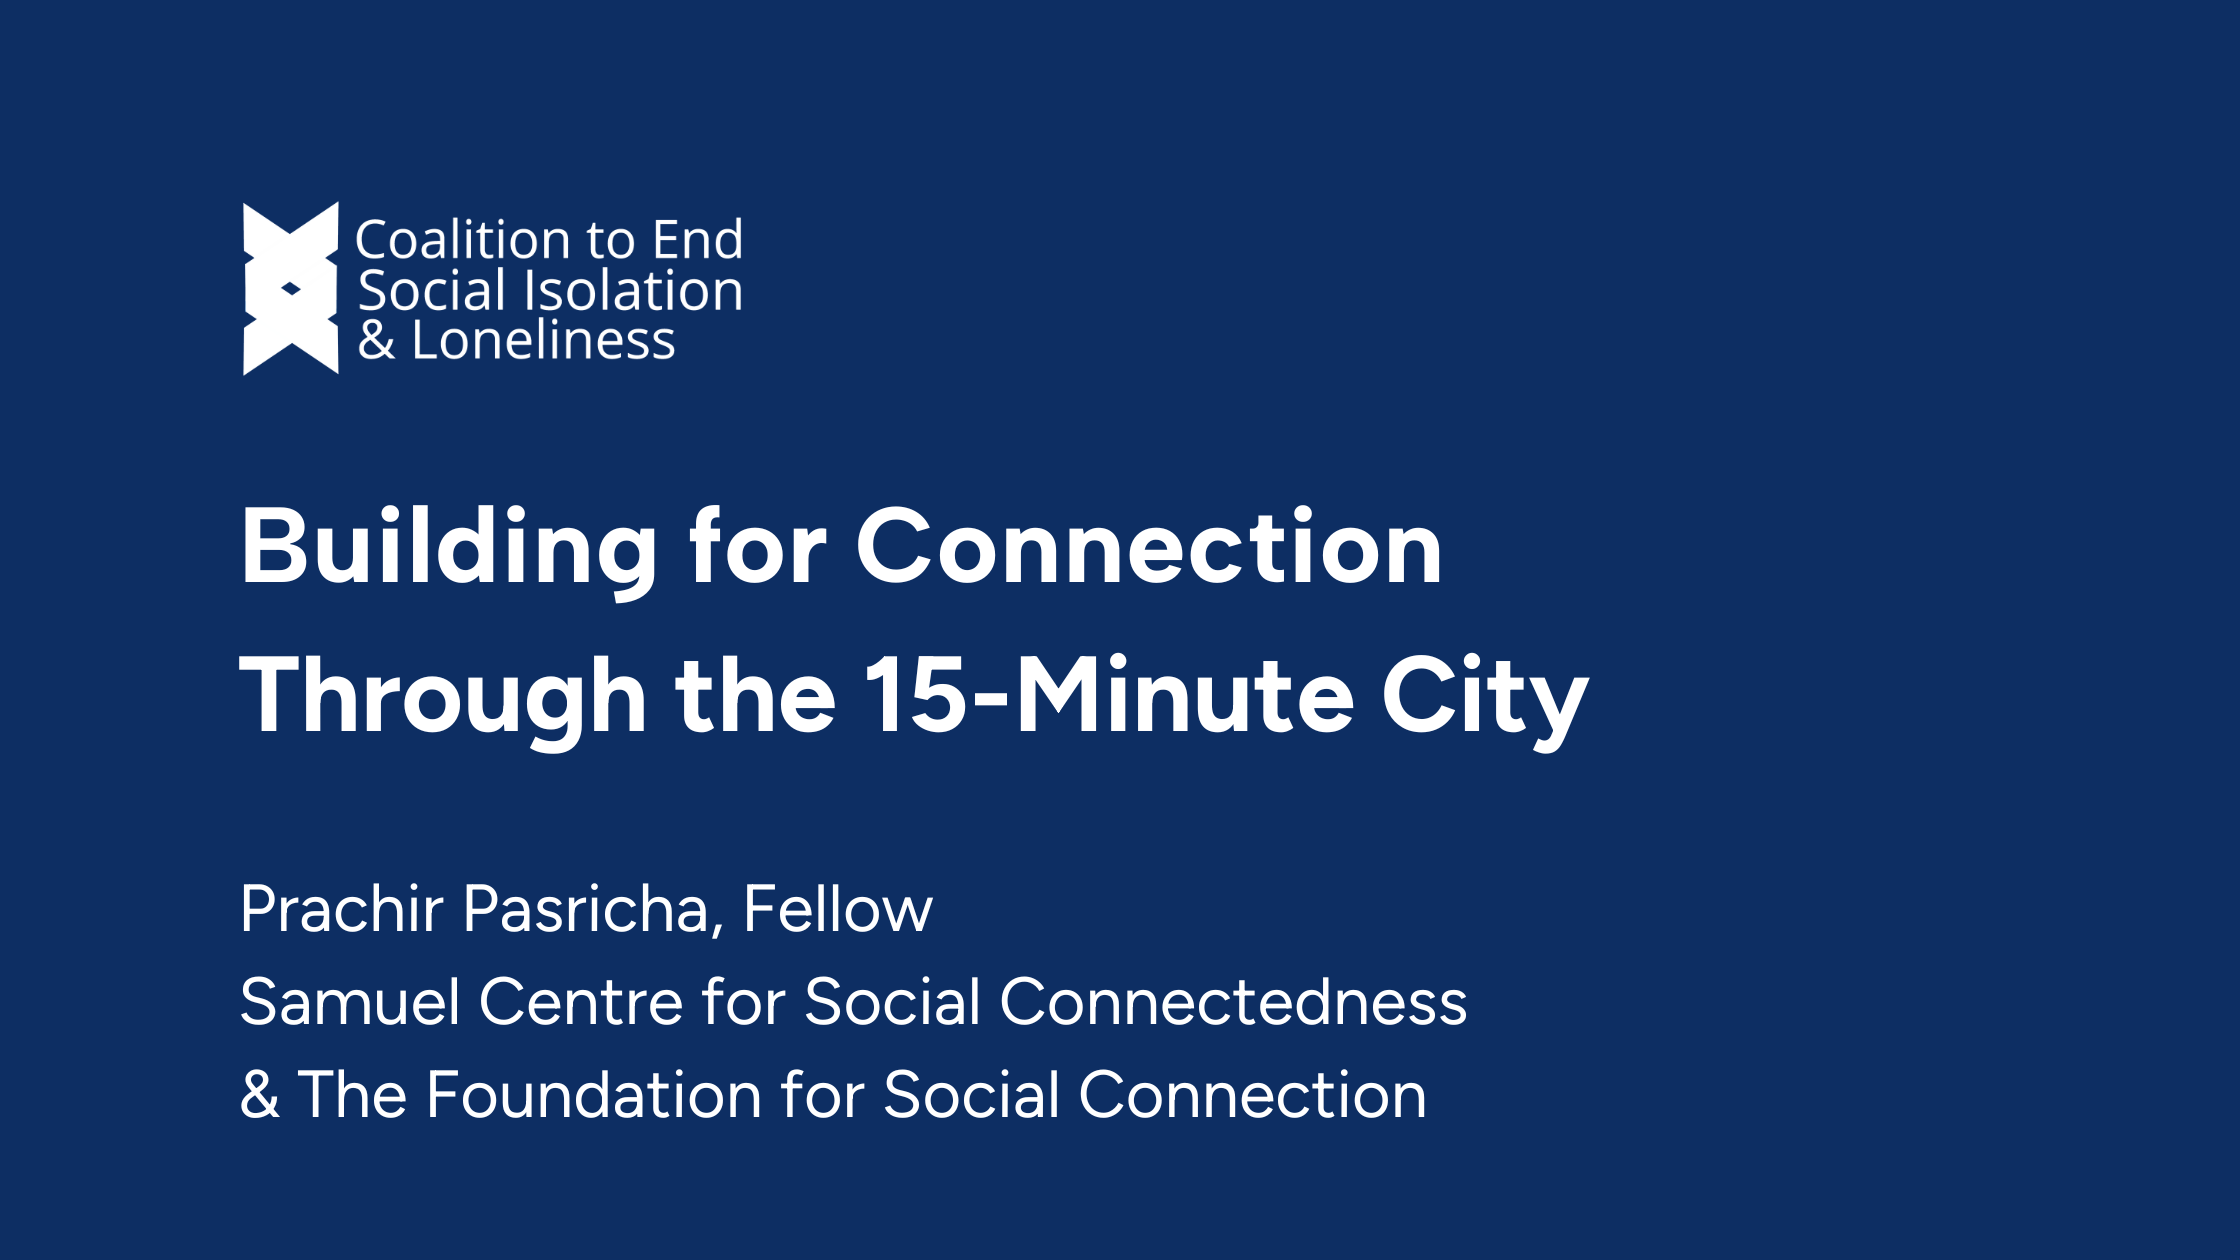 Building for Connection Through the 15-Minute City